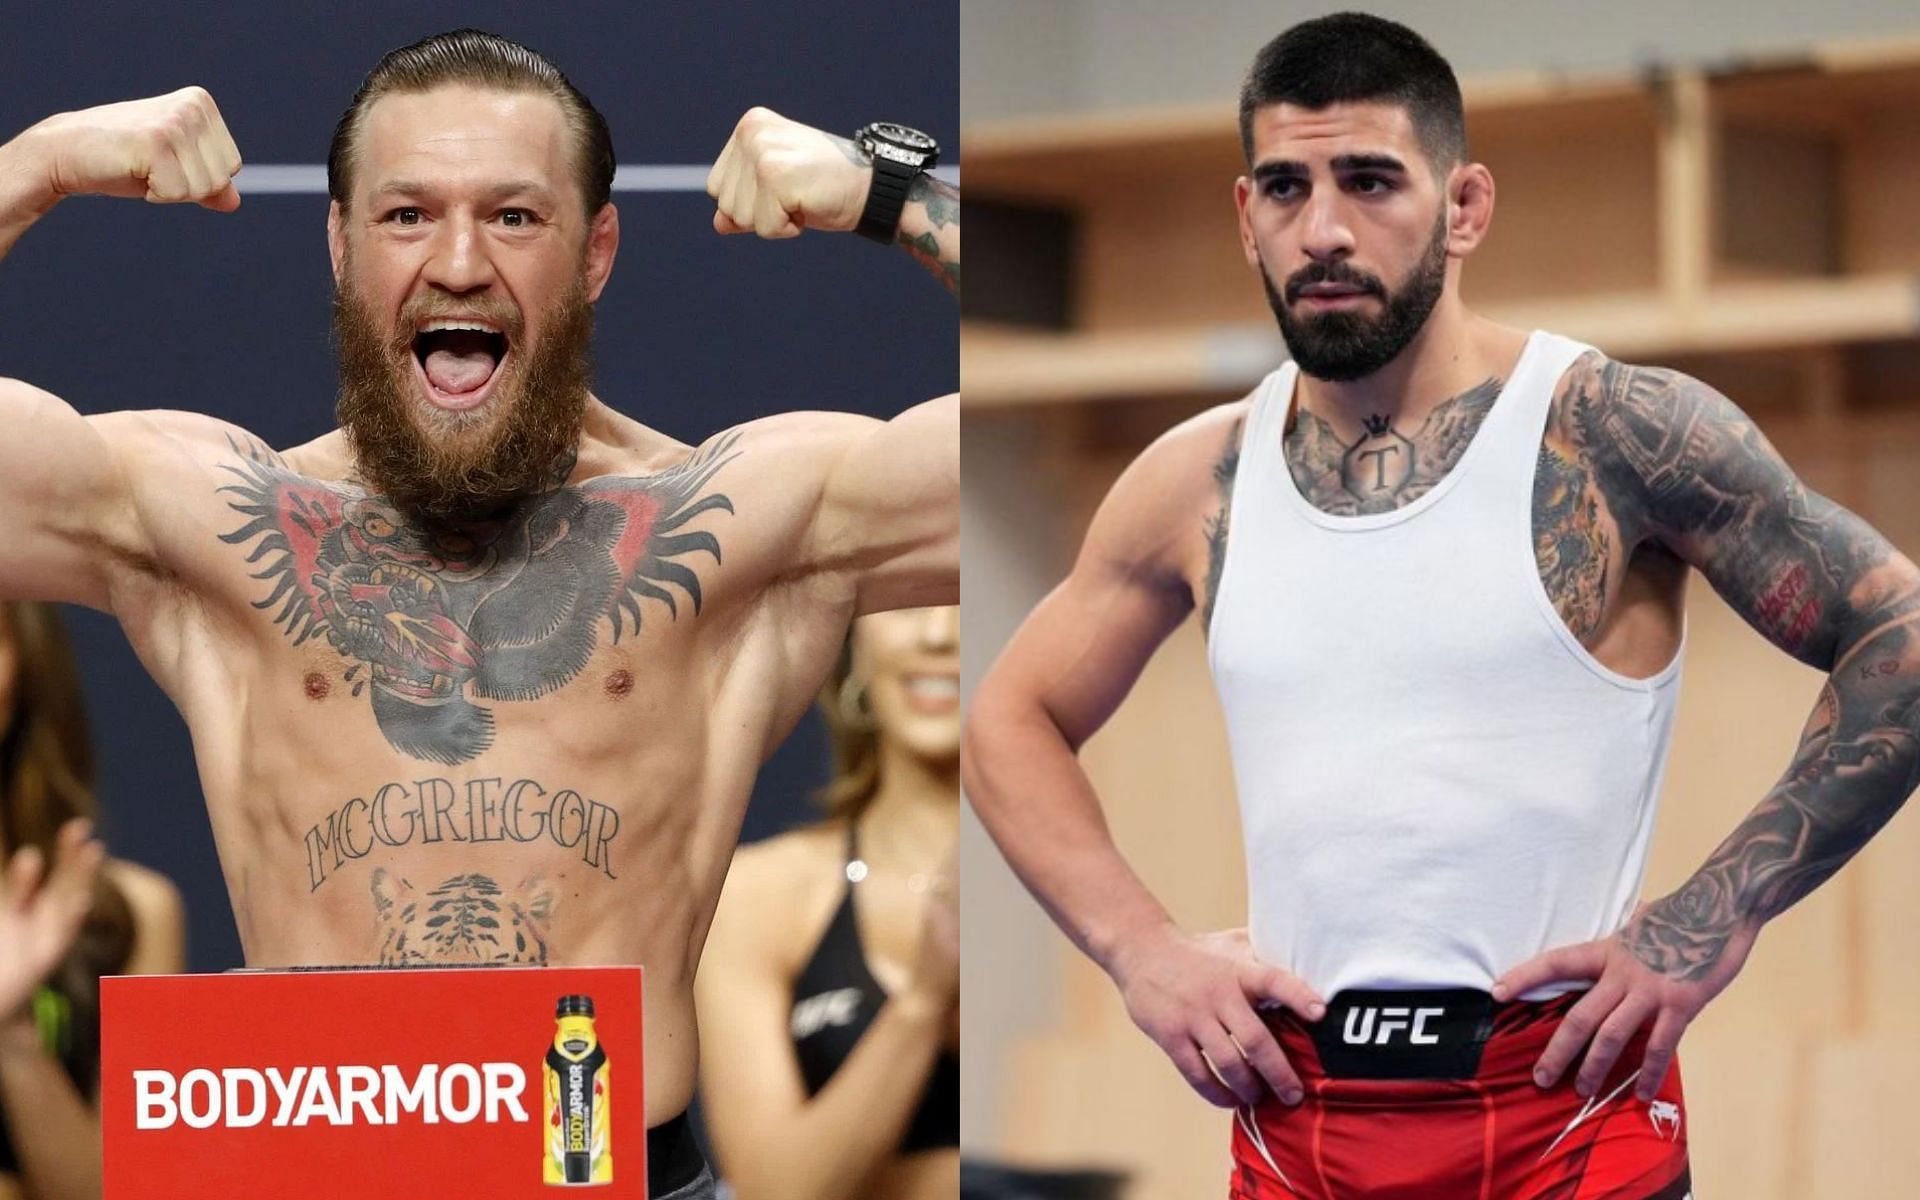 Ilia Topuria (right) has his eyes on a clash with Conor McGregor (left) at any weight class [Images Courtesy: @GettyImages and @iliatopuria on Instagram]